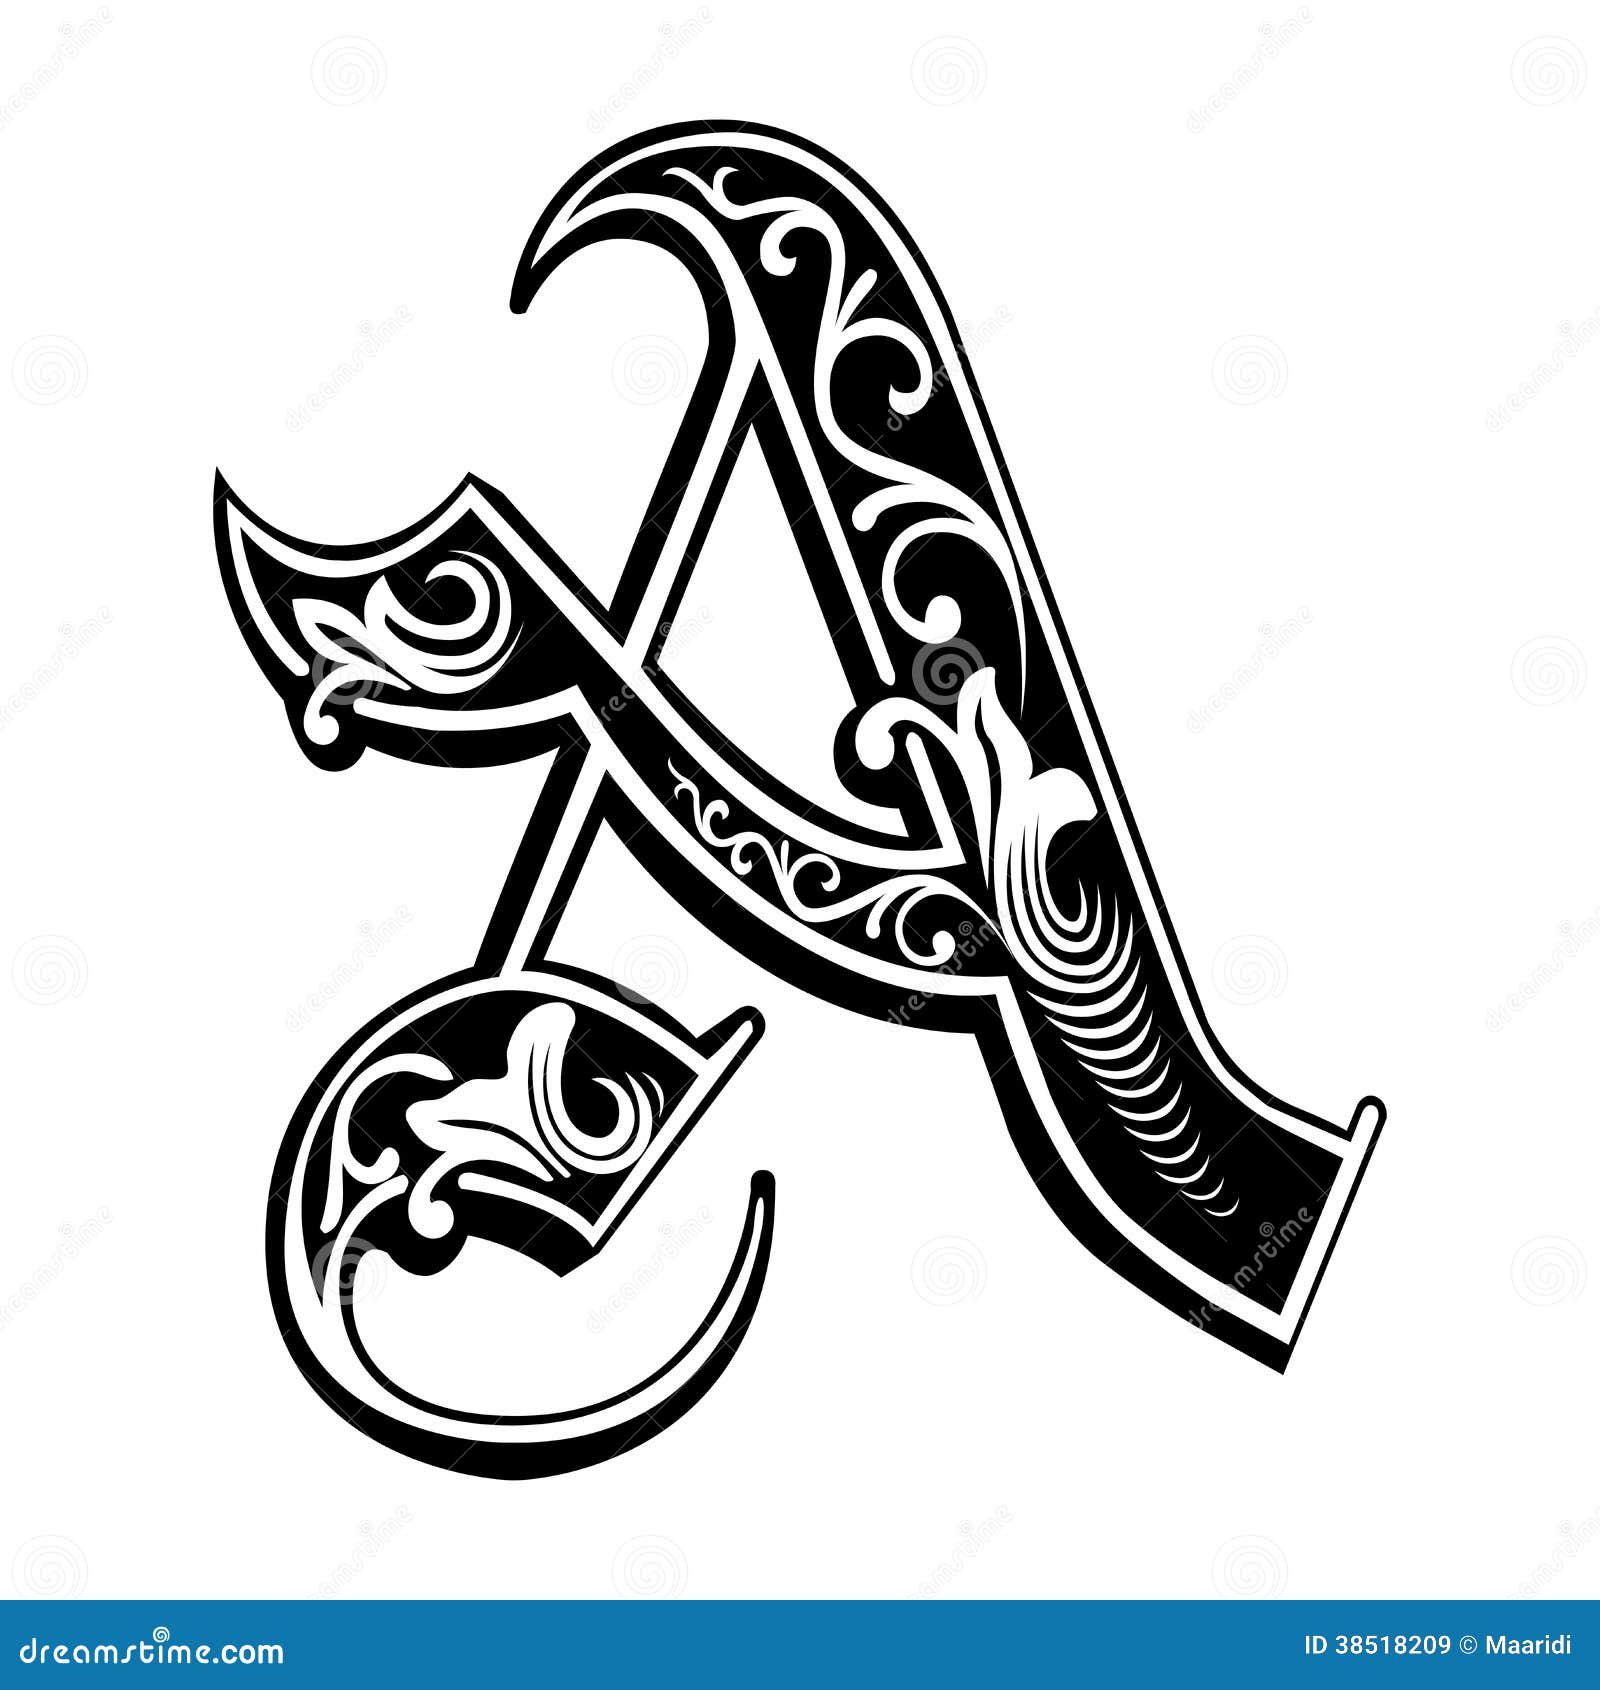 garnished gothic style font, letter a